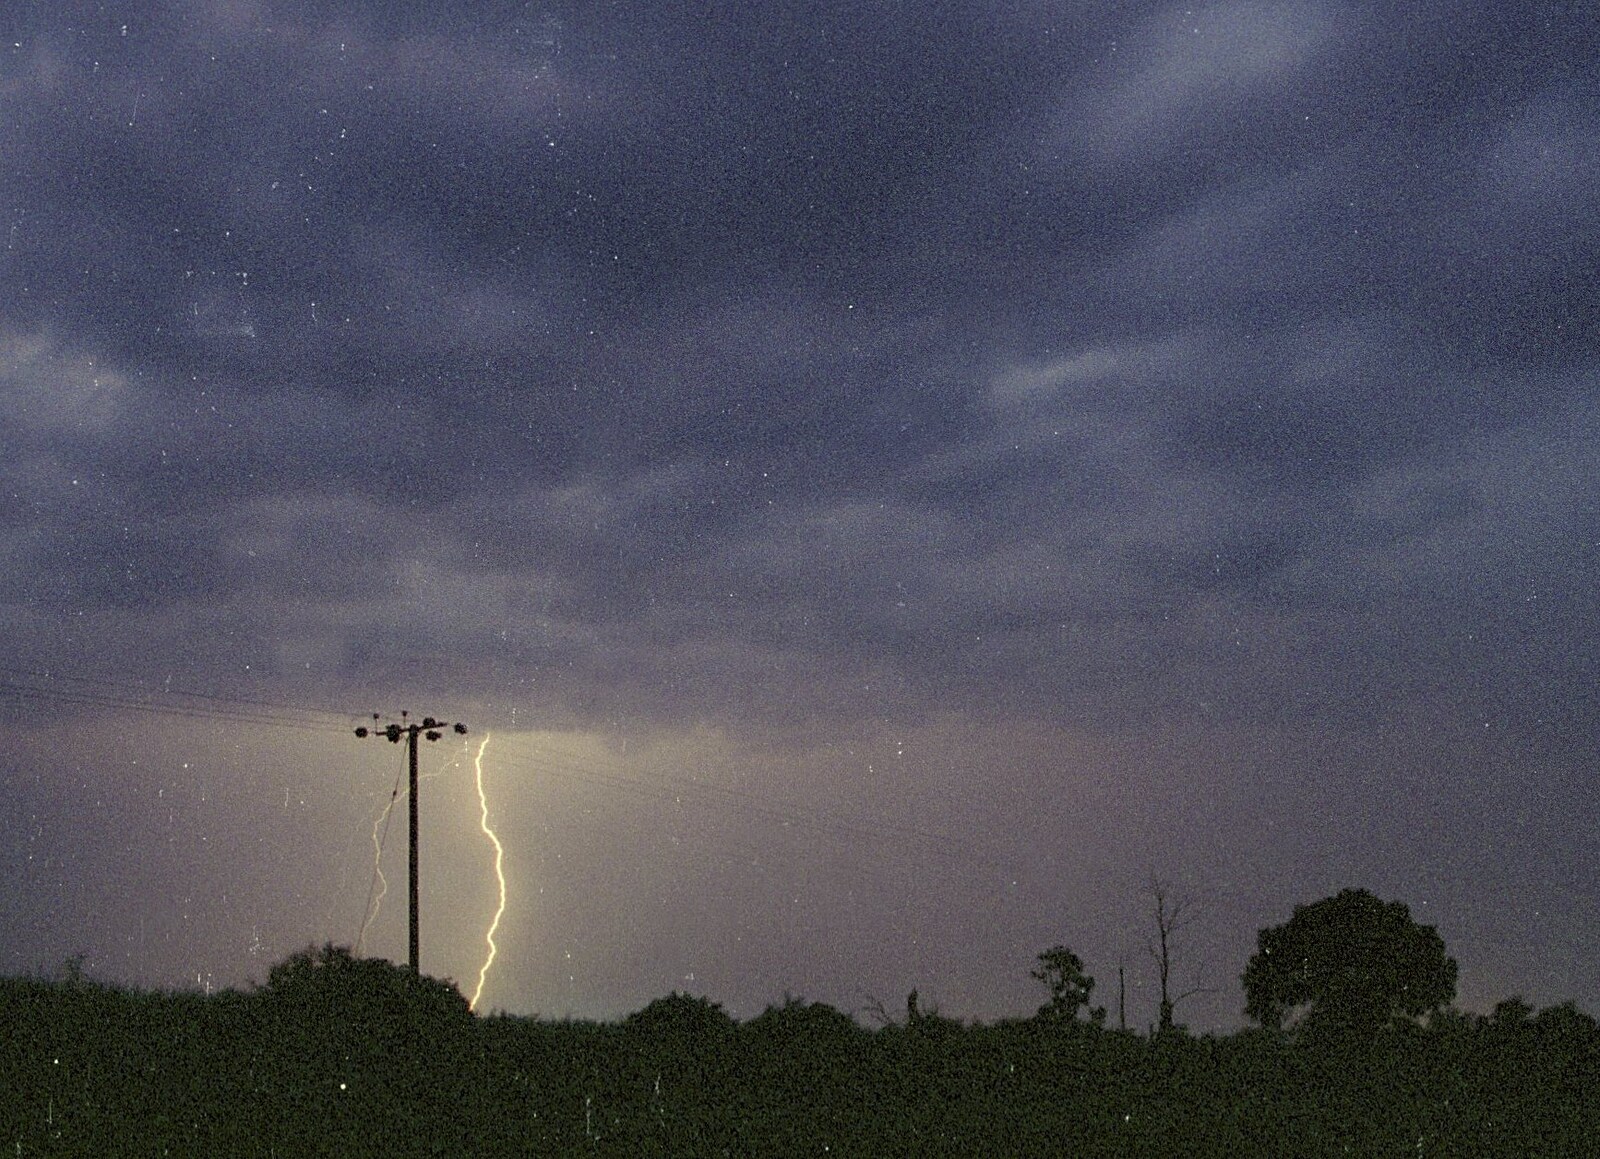 Another strike from House Renovation Randomness and a Spot of Lightning, Brome, Suffolk - 19th June 1994